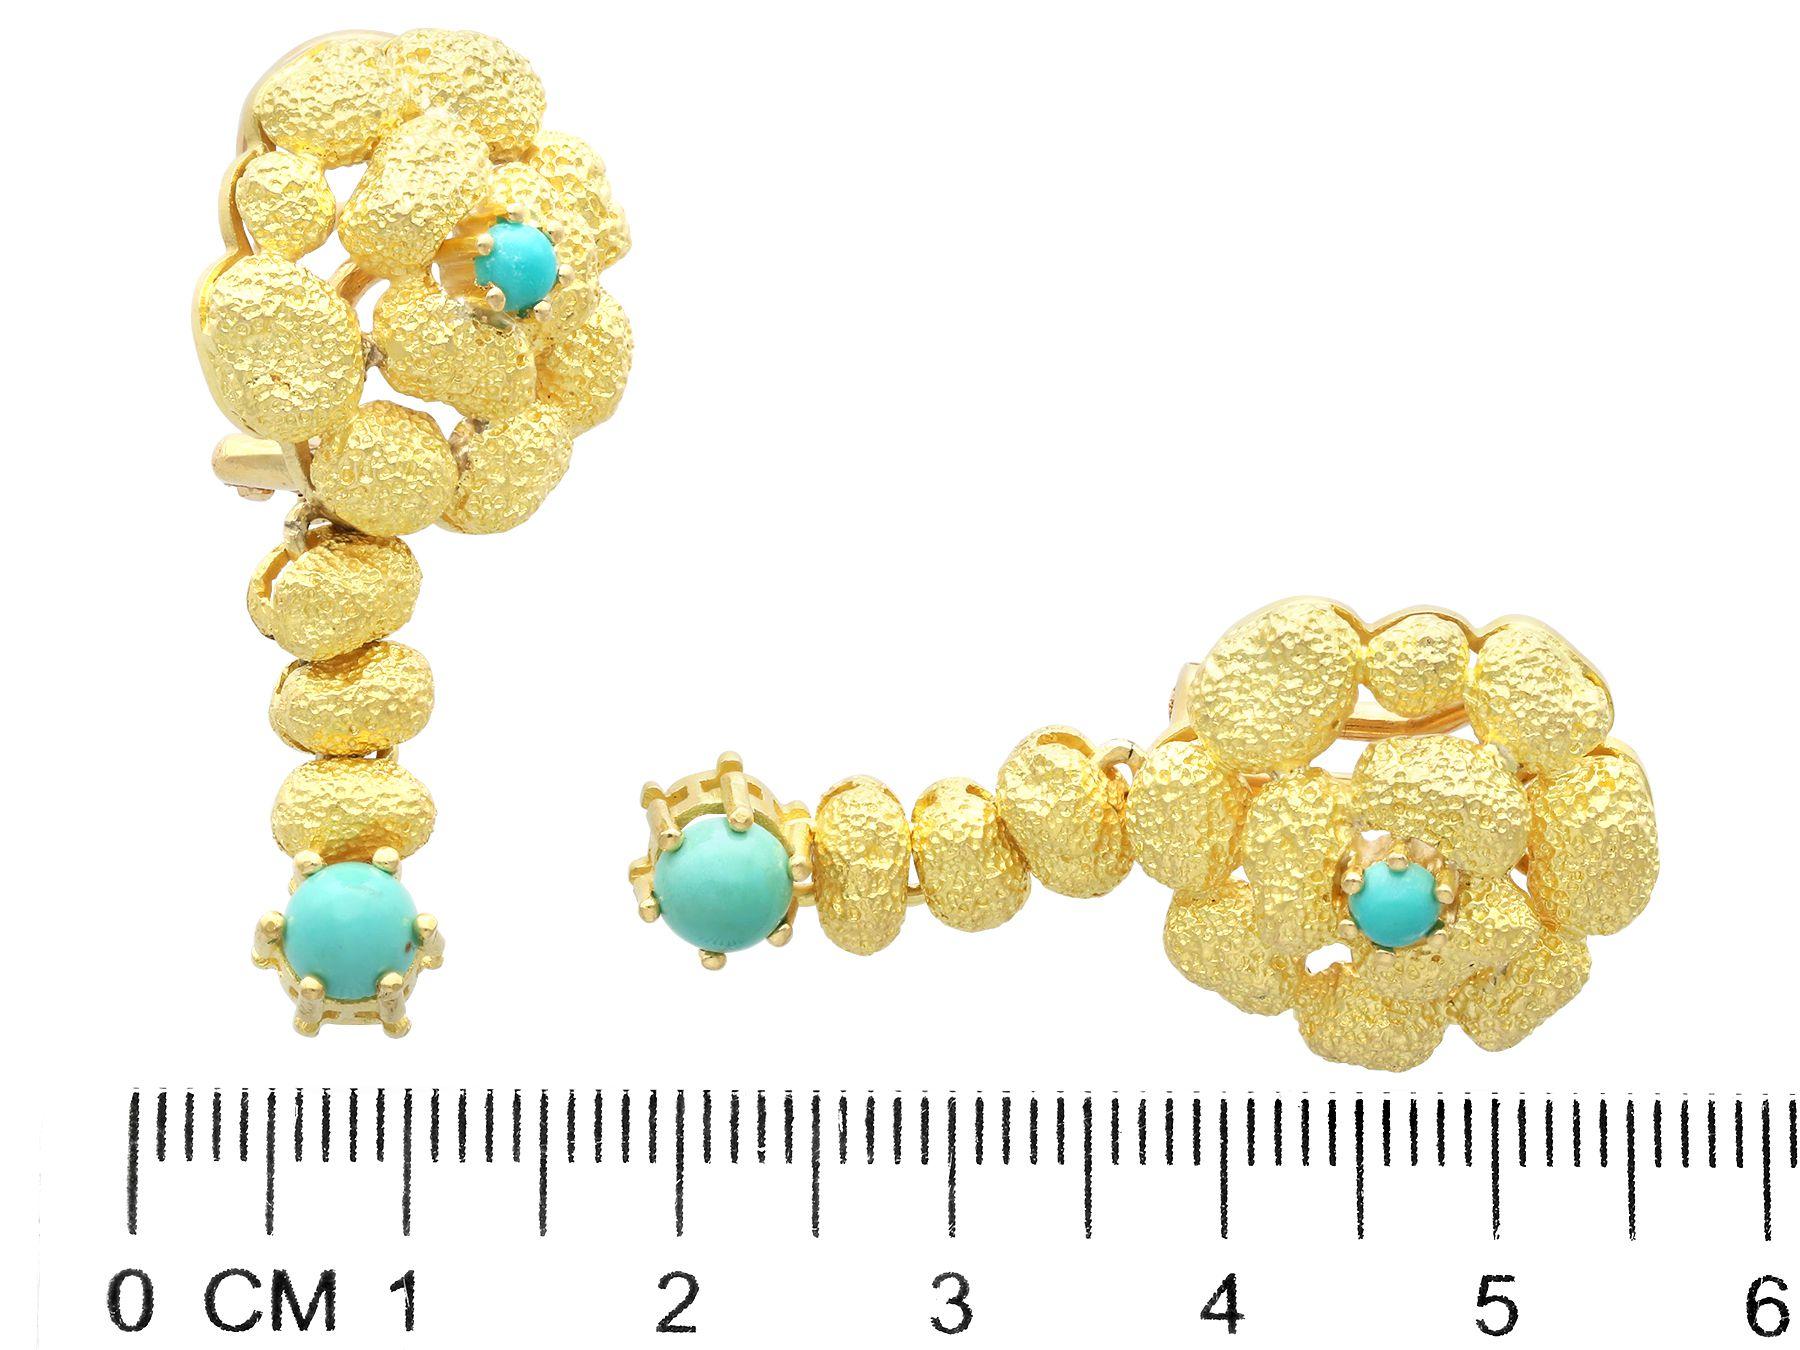 Cabochon 1950s Vintage 1.10 Carat Turquoise and 18k Yellow Gold Earrings For Sale